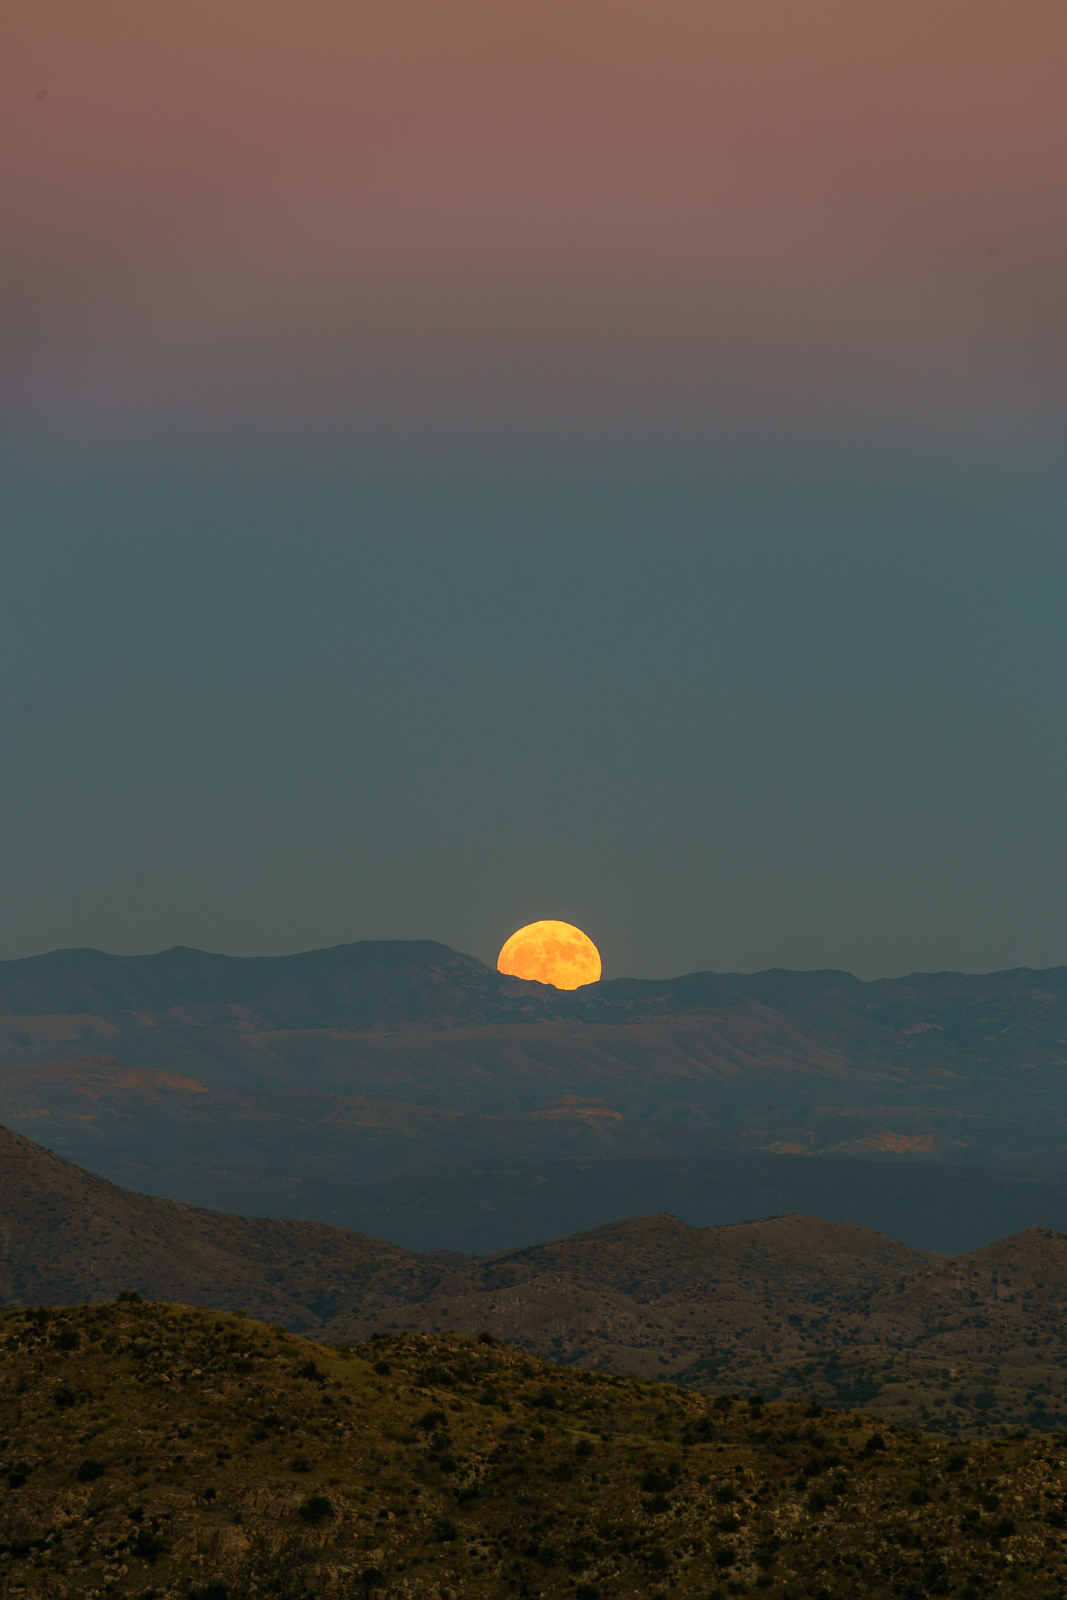 A Hunter's Moon rising behind the Winchester Mountains - taken near the Bellota Trail. October 2016.